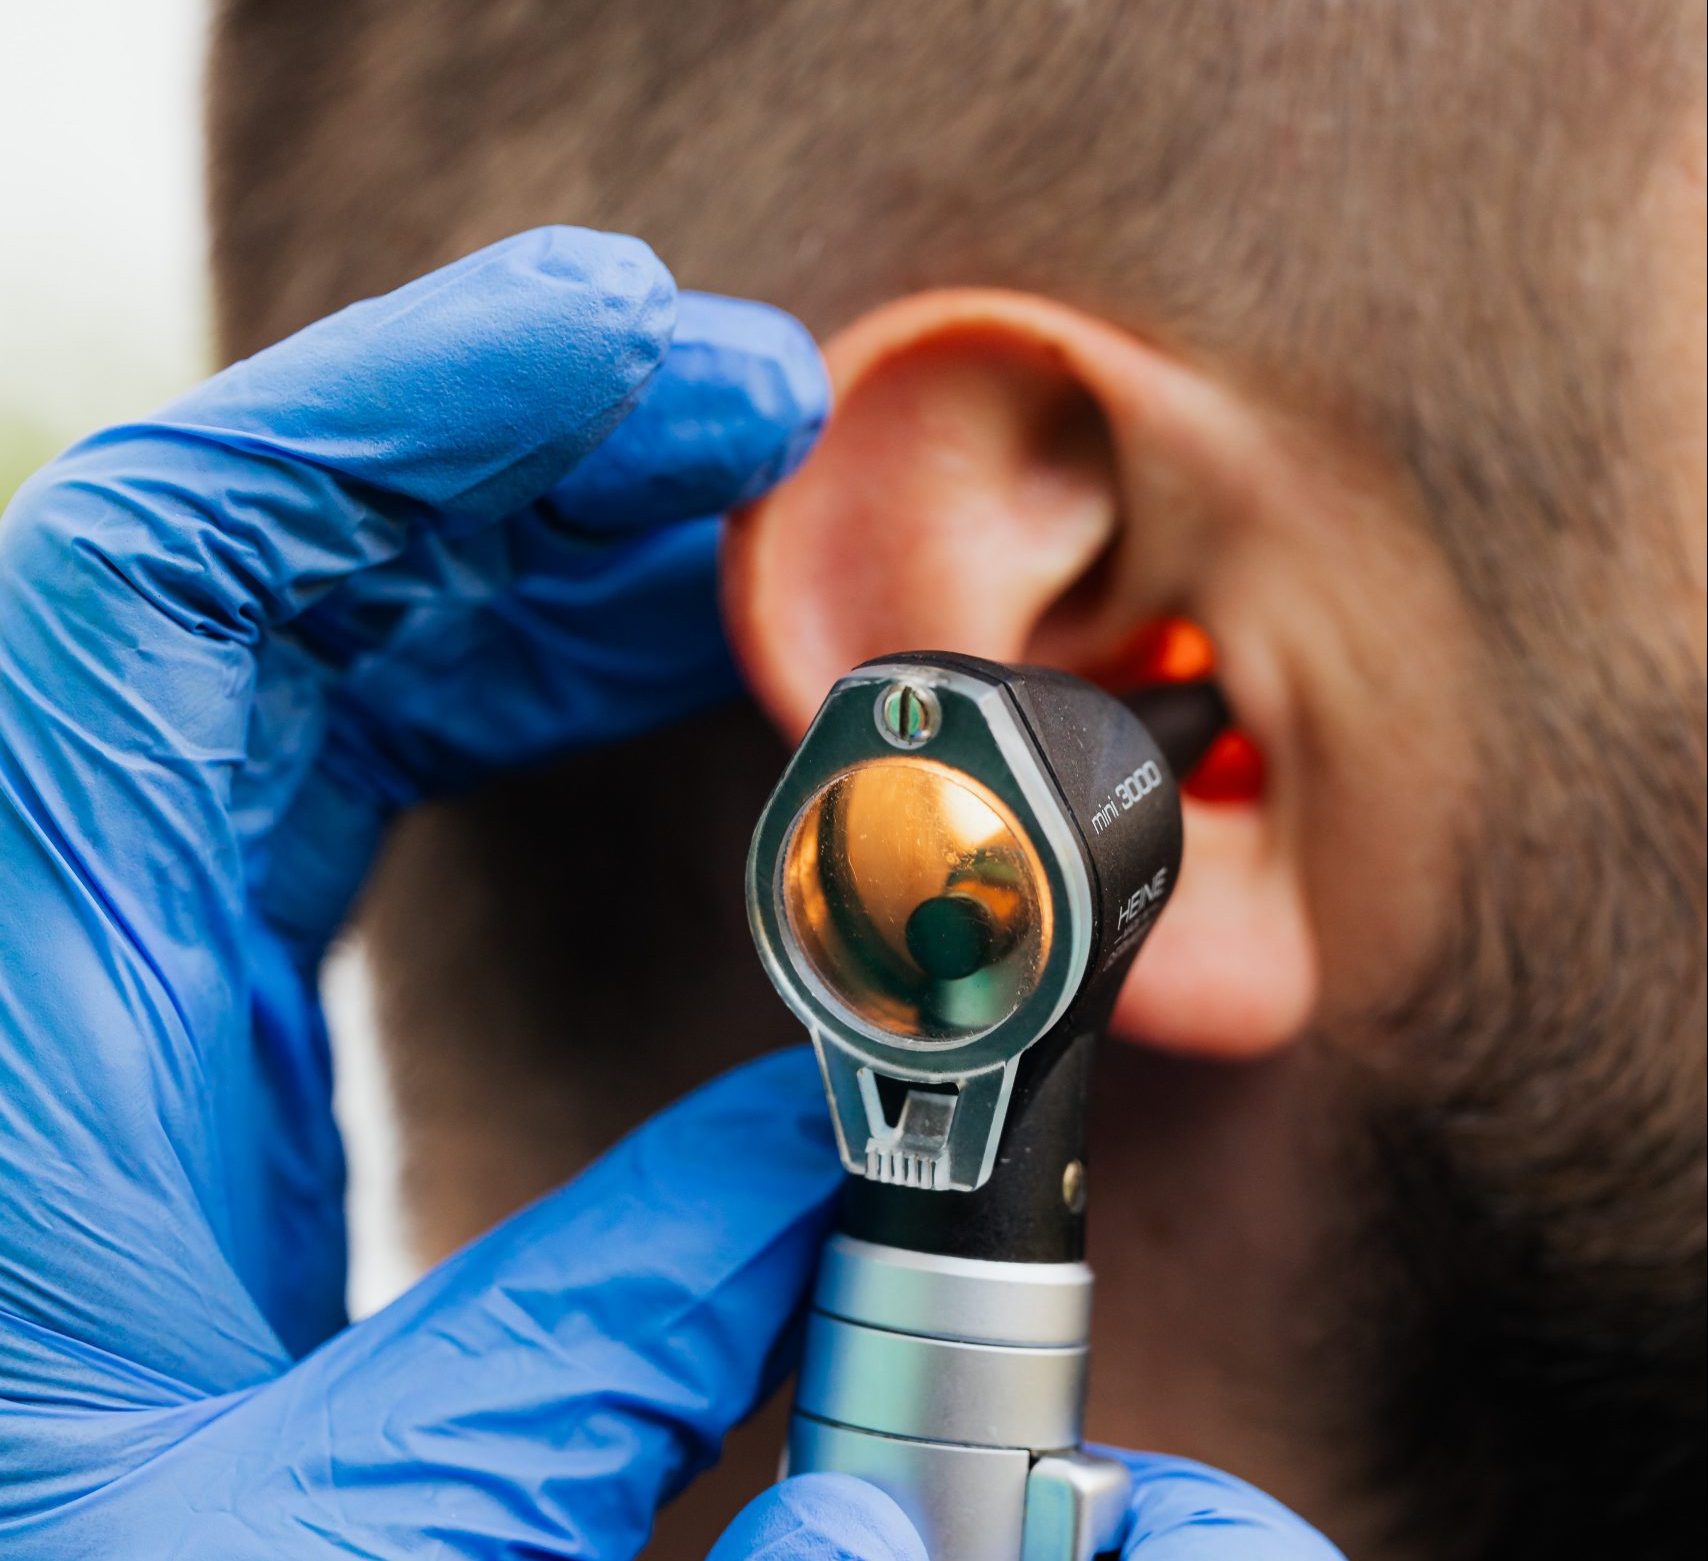 Audiologist examine patient's ear with otoscope